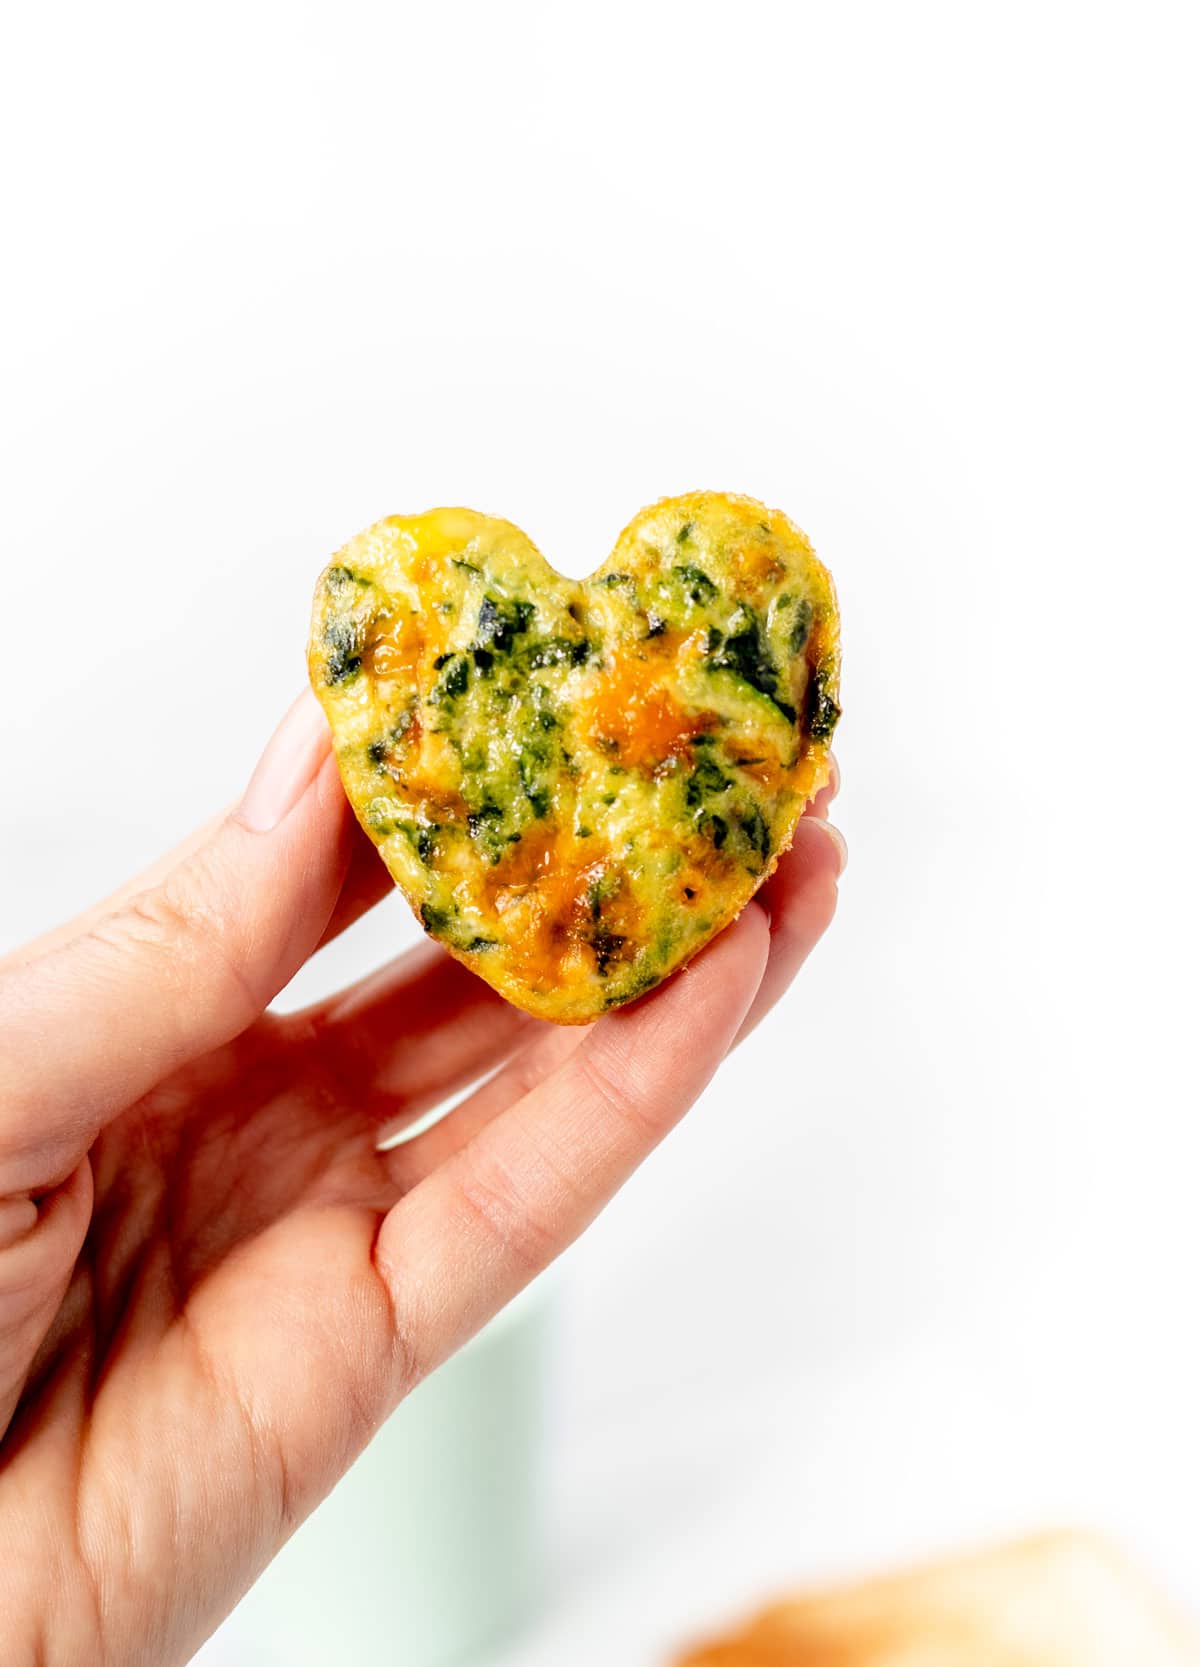 A mini zucchini frittata muffin in the shape of a heart being held in someone's hand.